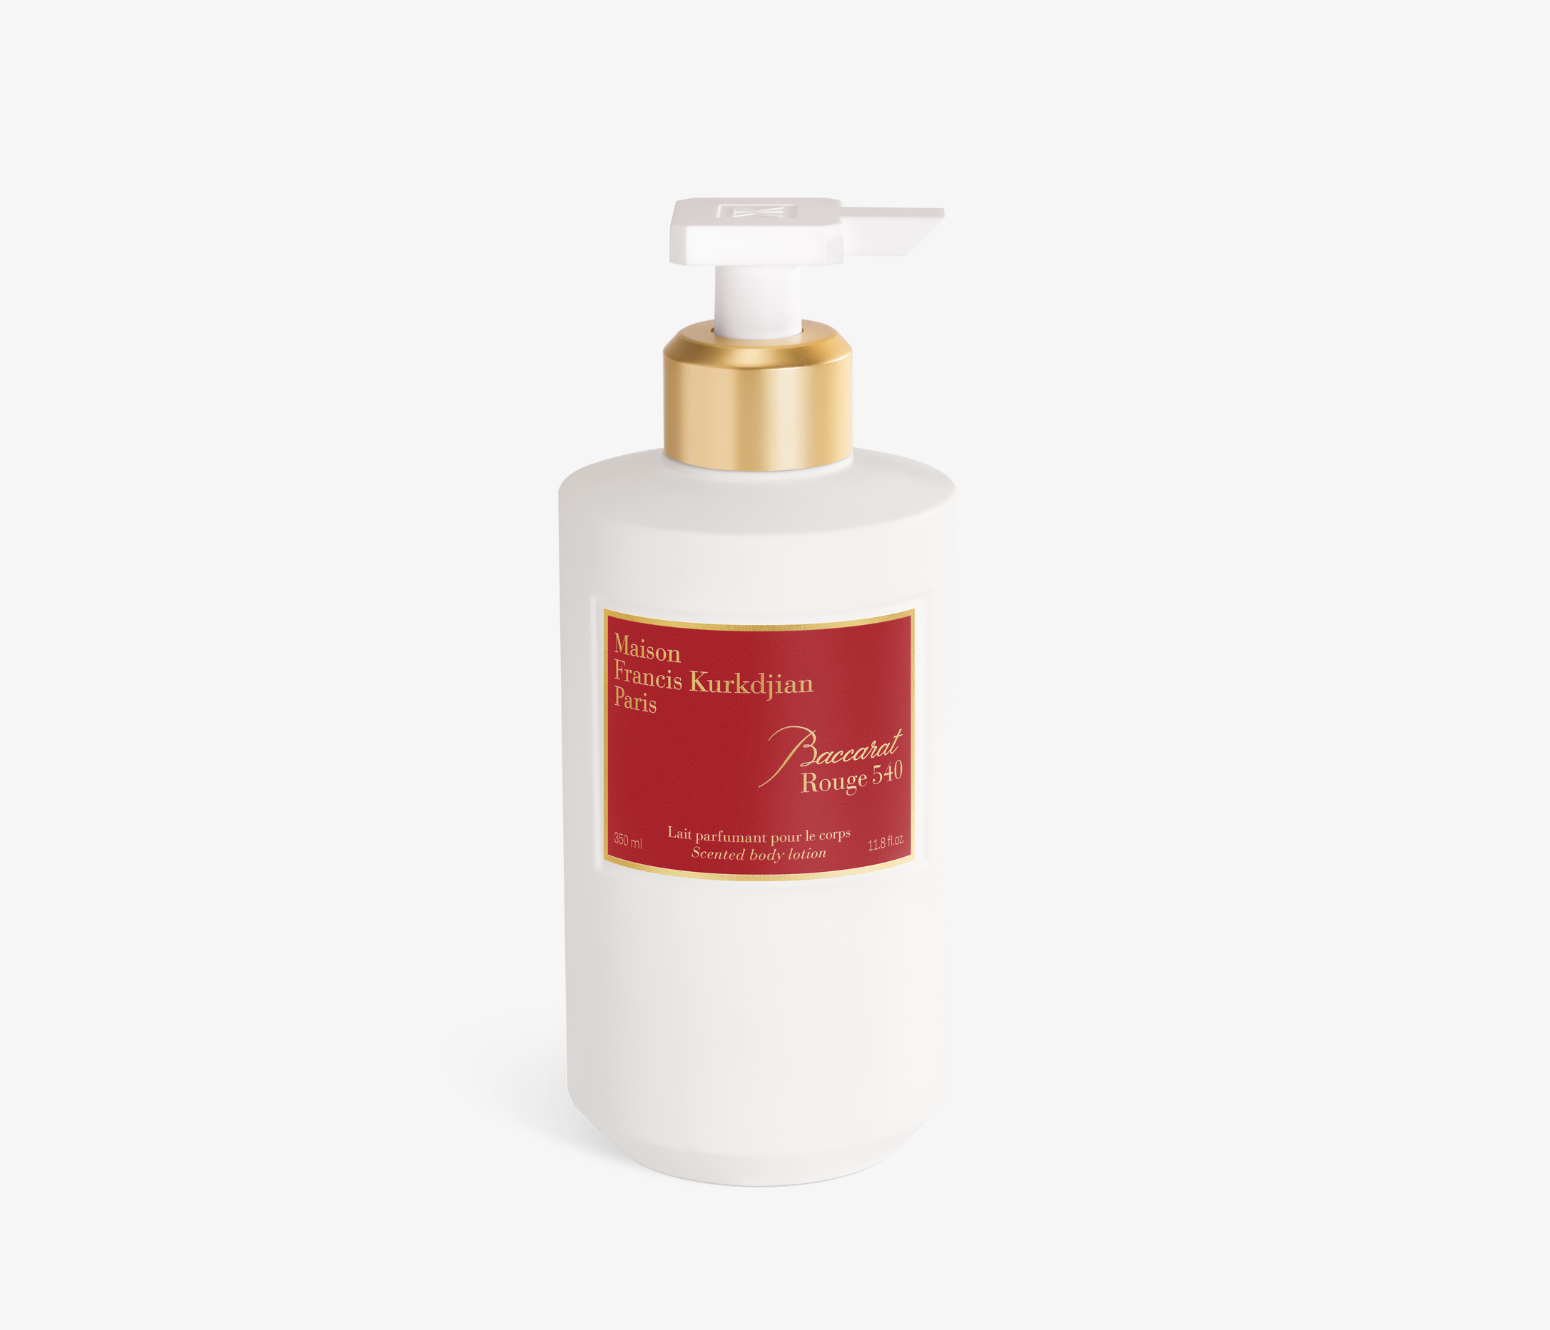 Baccarat Rouge 540 Scented Body Cream